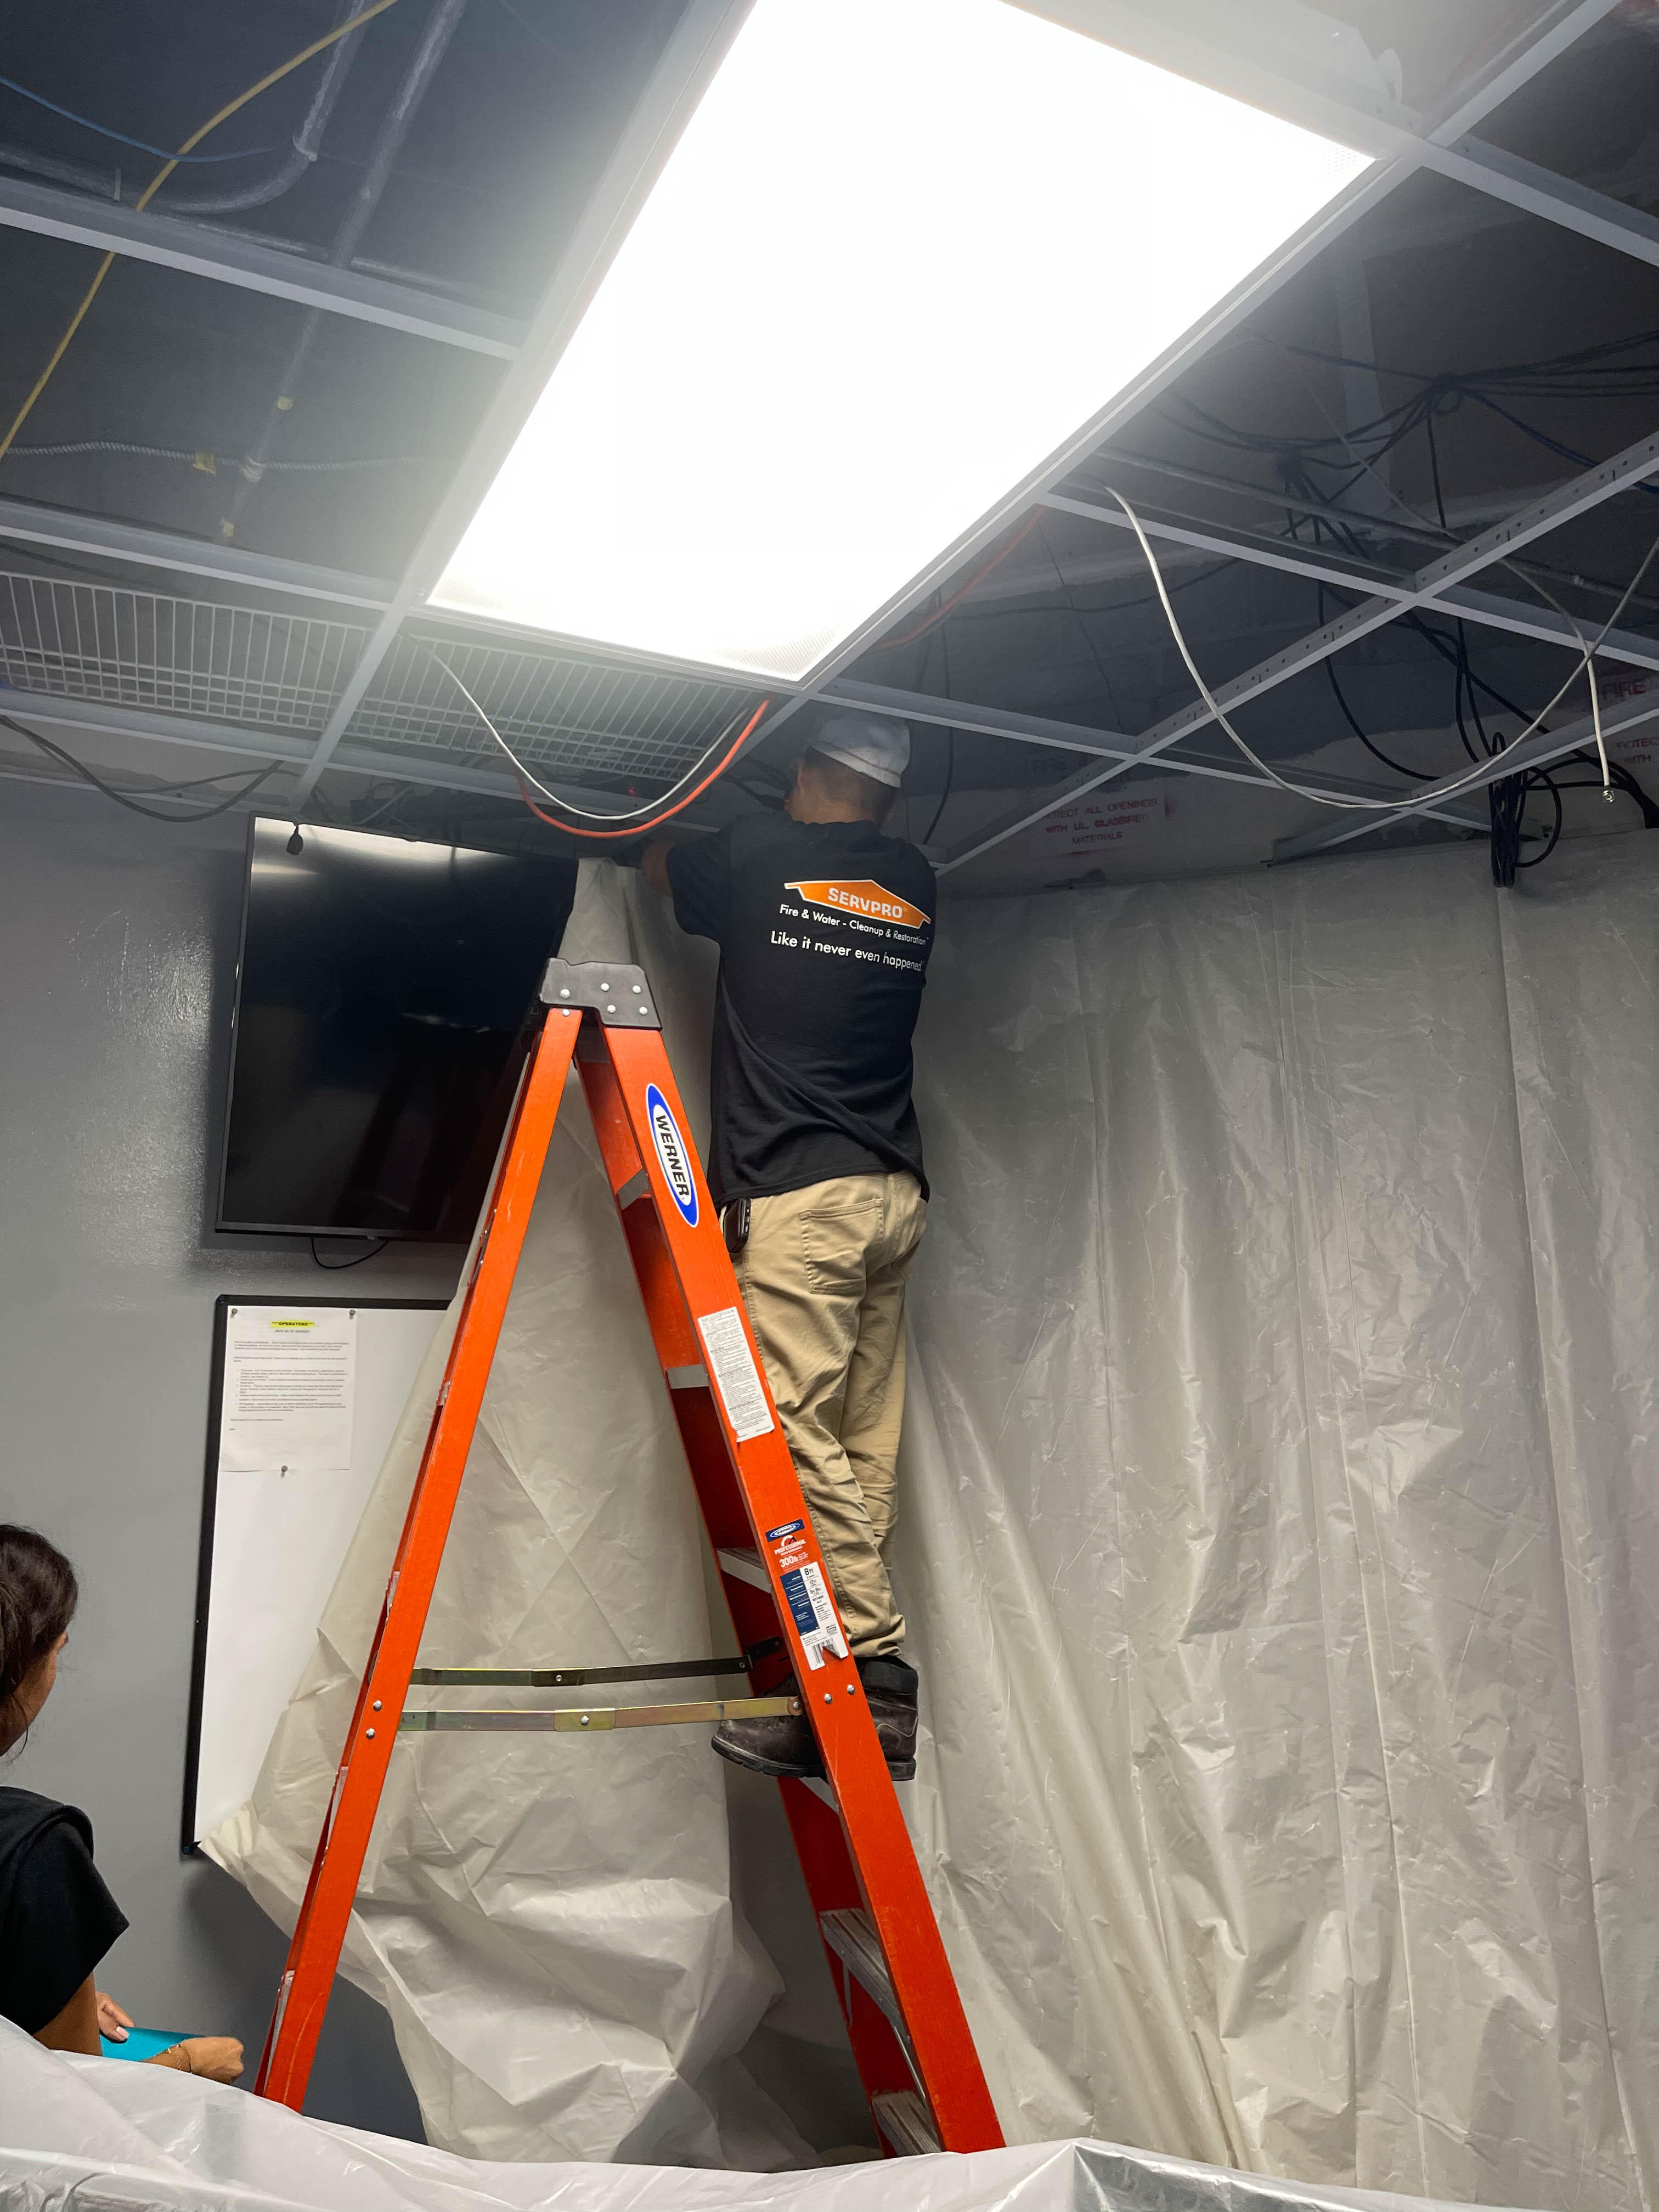 SERVPRO of Cape Coral has a team certified to handle water, mold and fire emergencies in St James City, FL, we have the right equipment to clean it up. Call us for professional help!